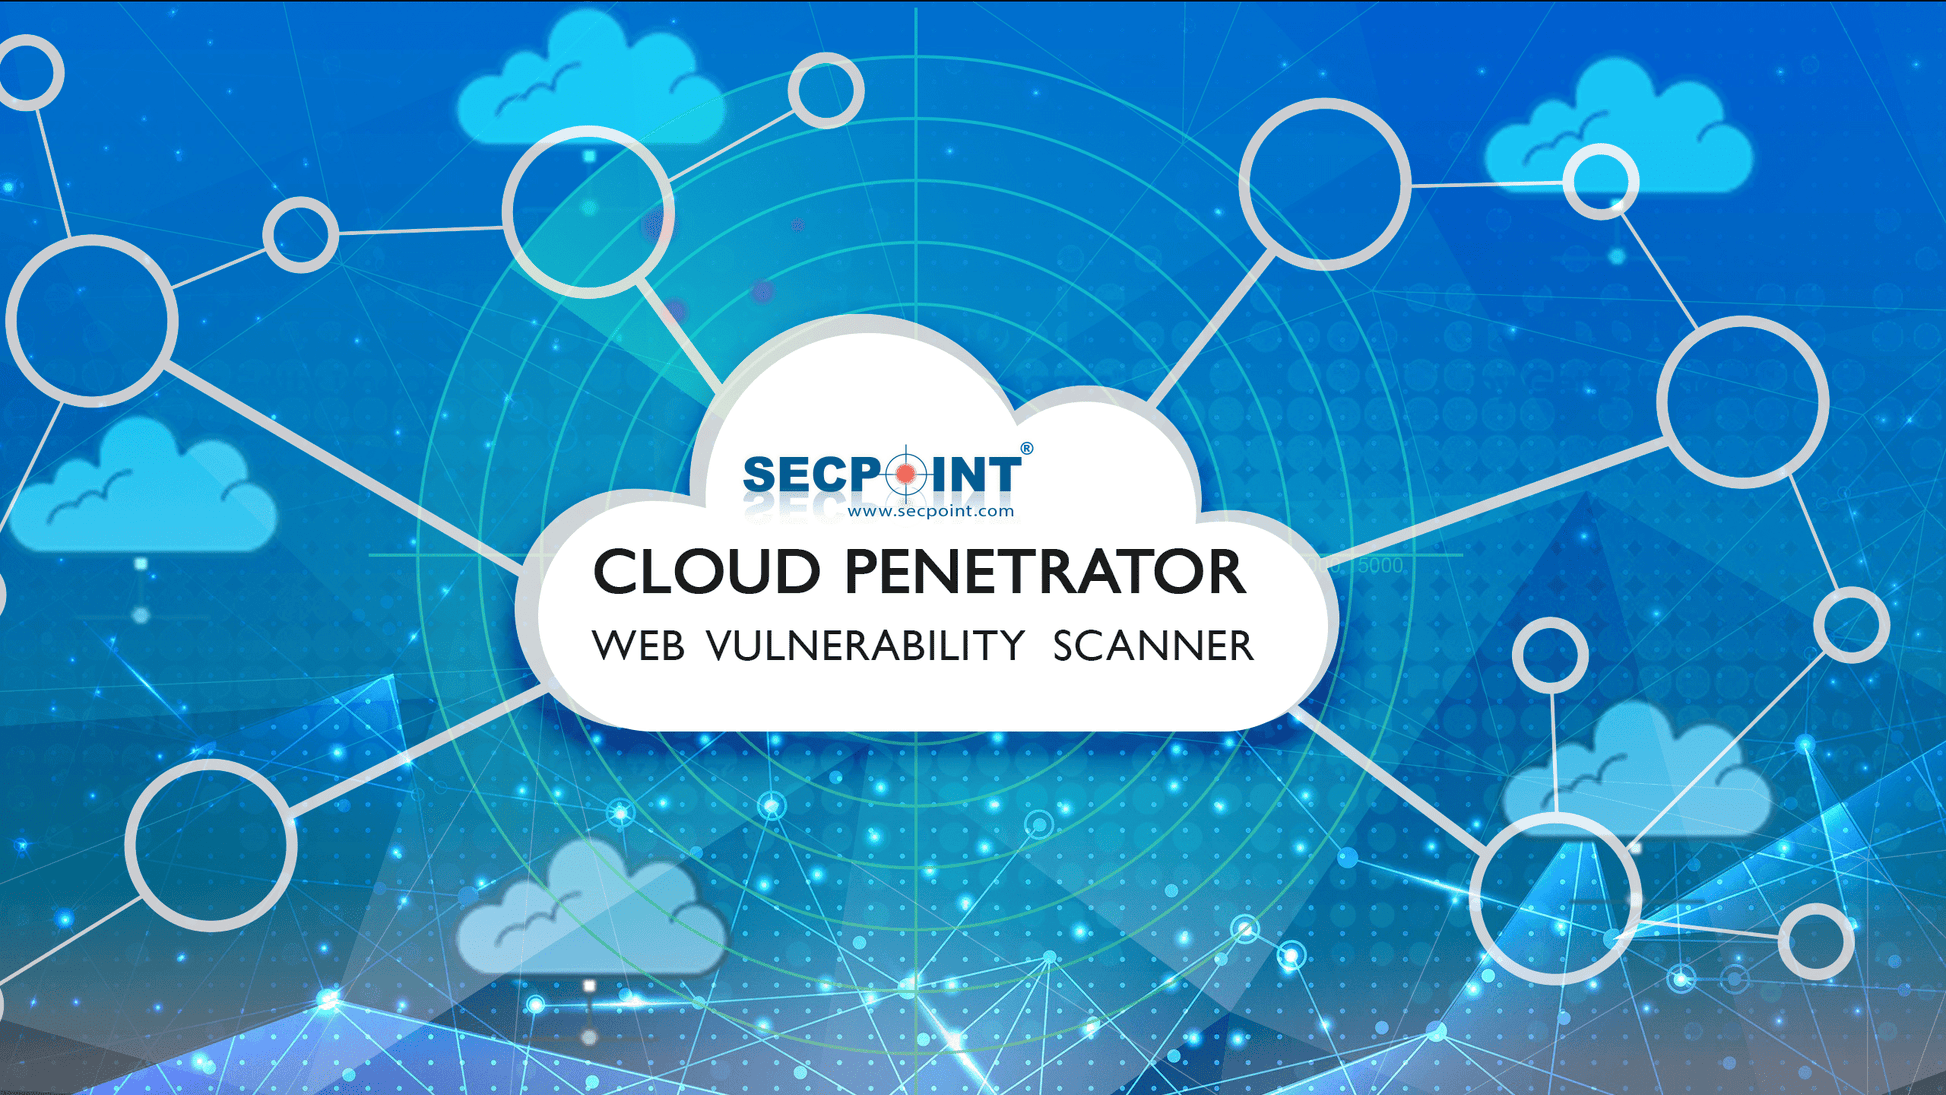 SecPoint Cloud Penetrator S9 - Vulnerability Scanning of 512 IPs  for 1 Year Static Scan License - SecPoint